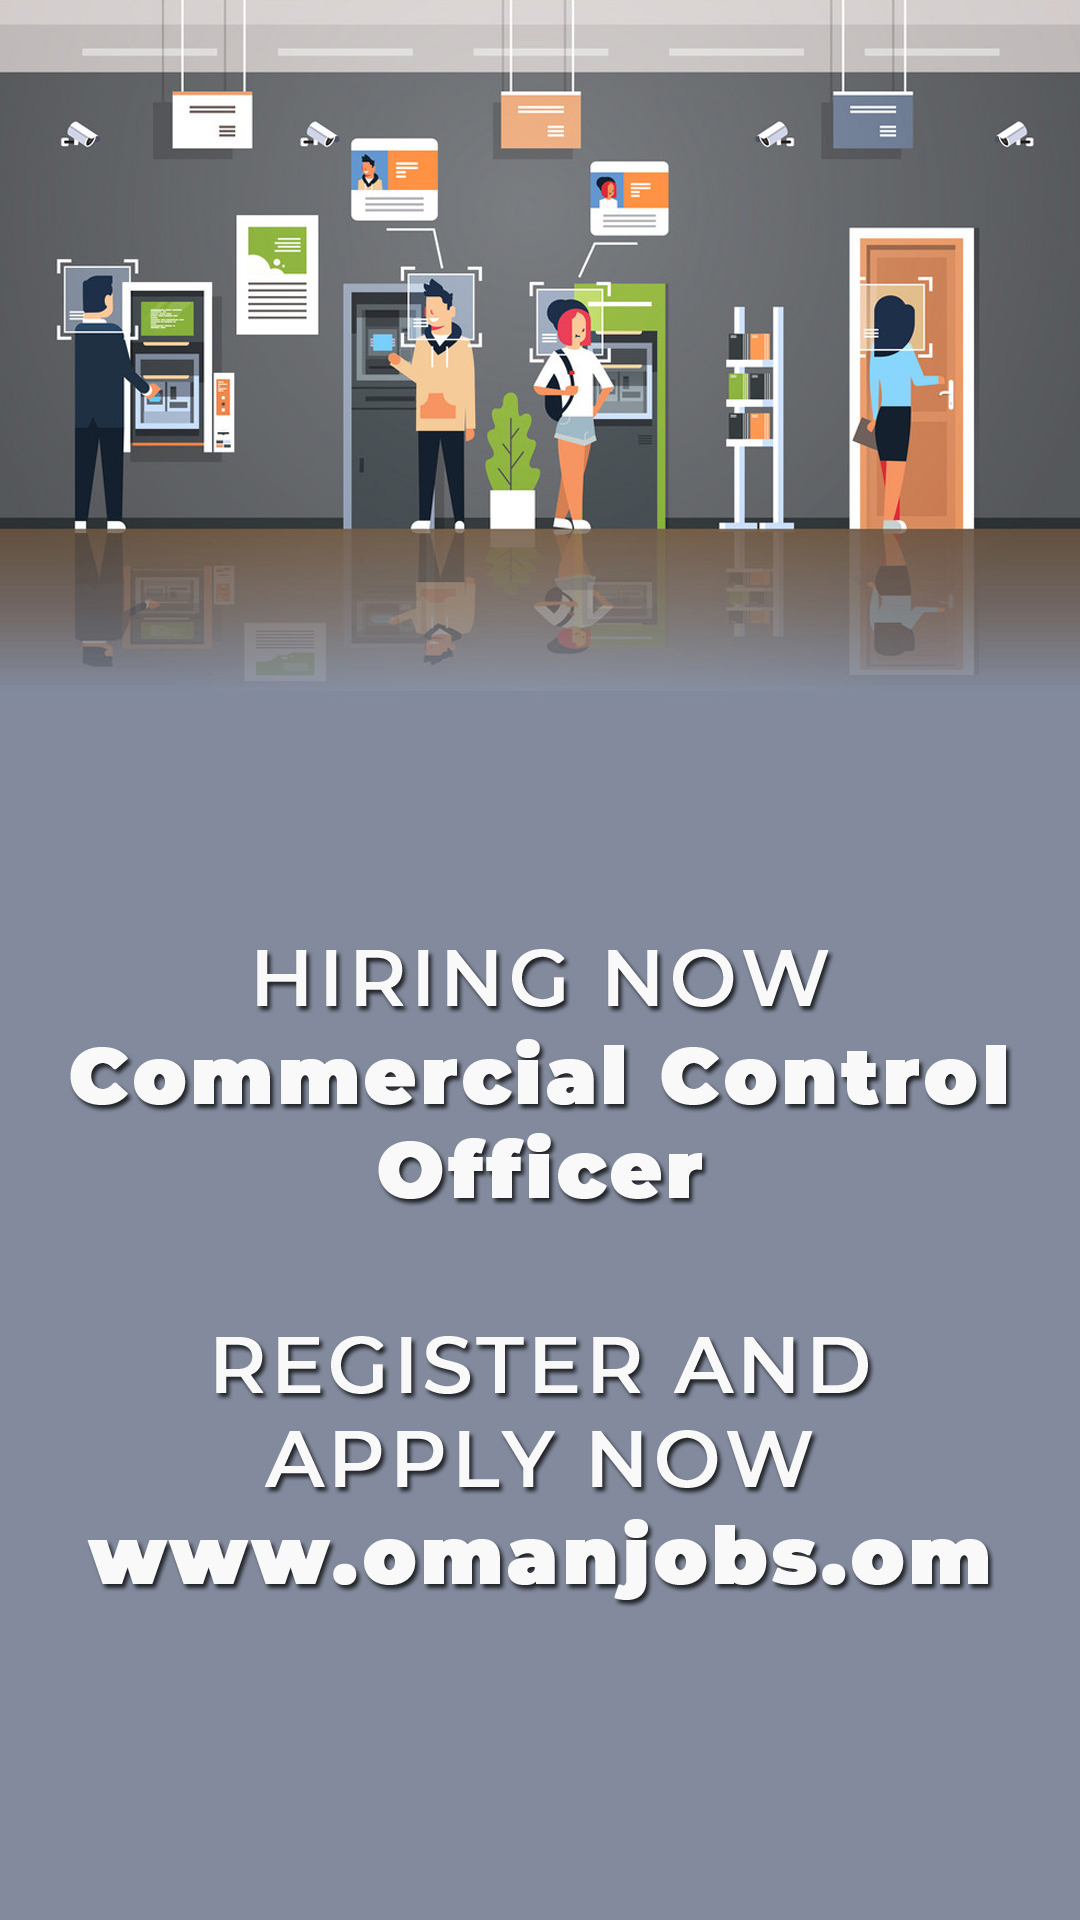 HIRING NOW Commercial Control Officer